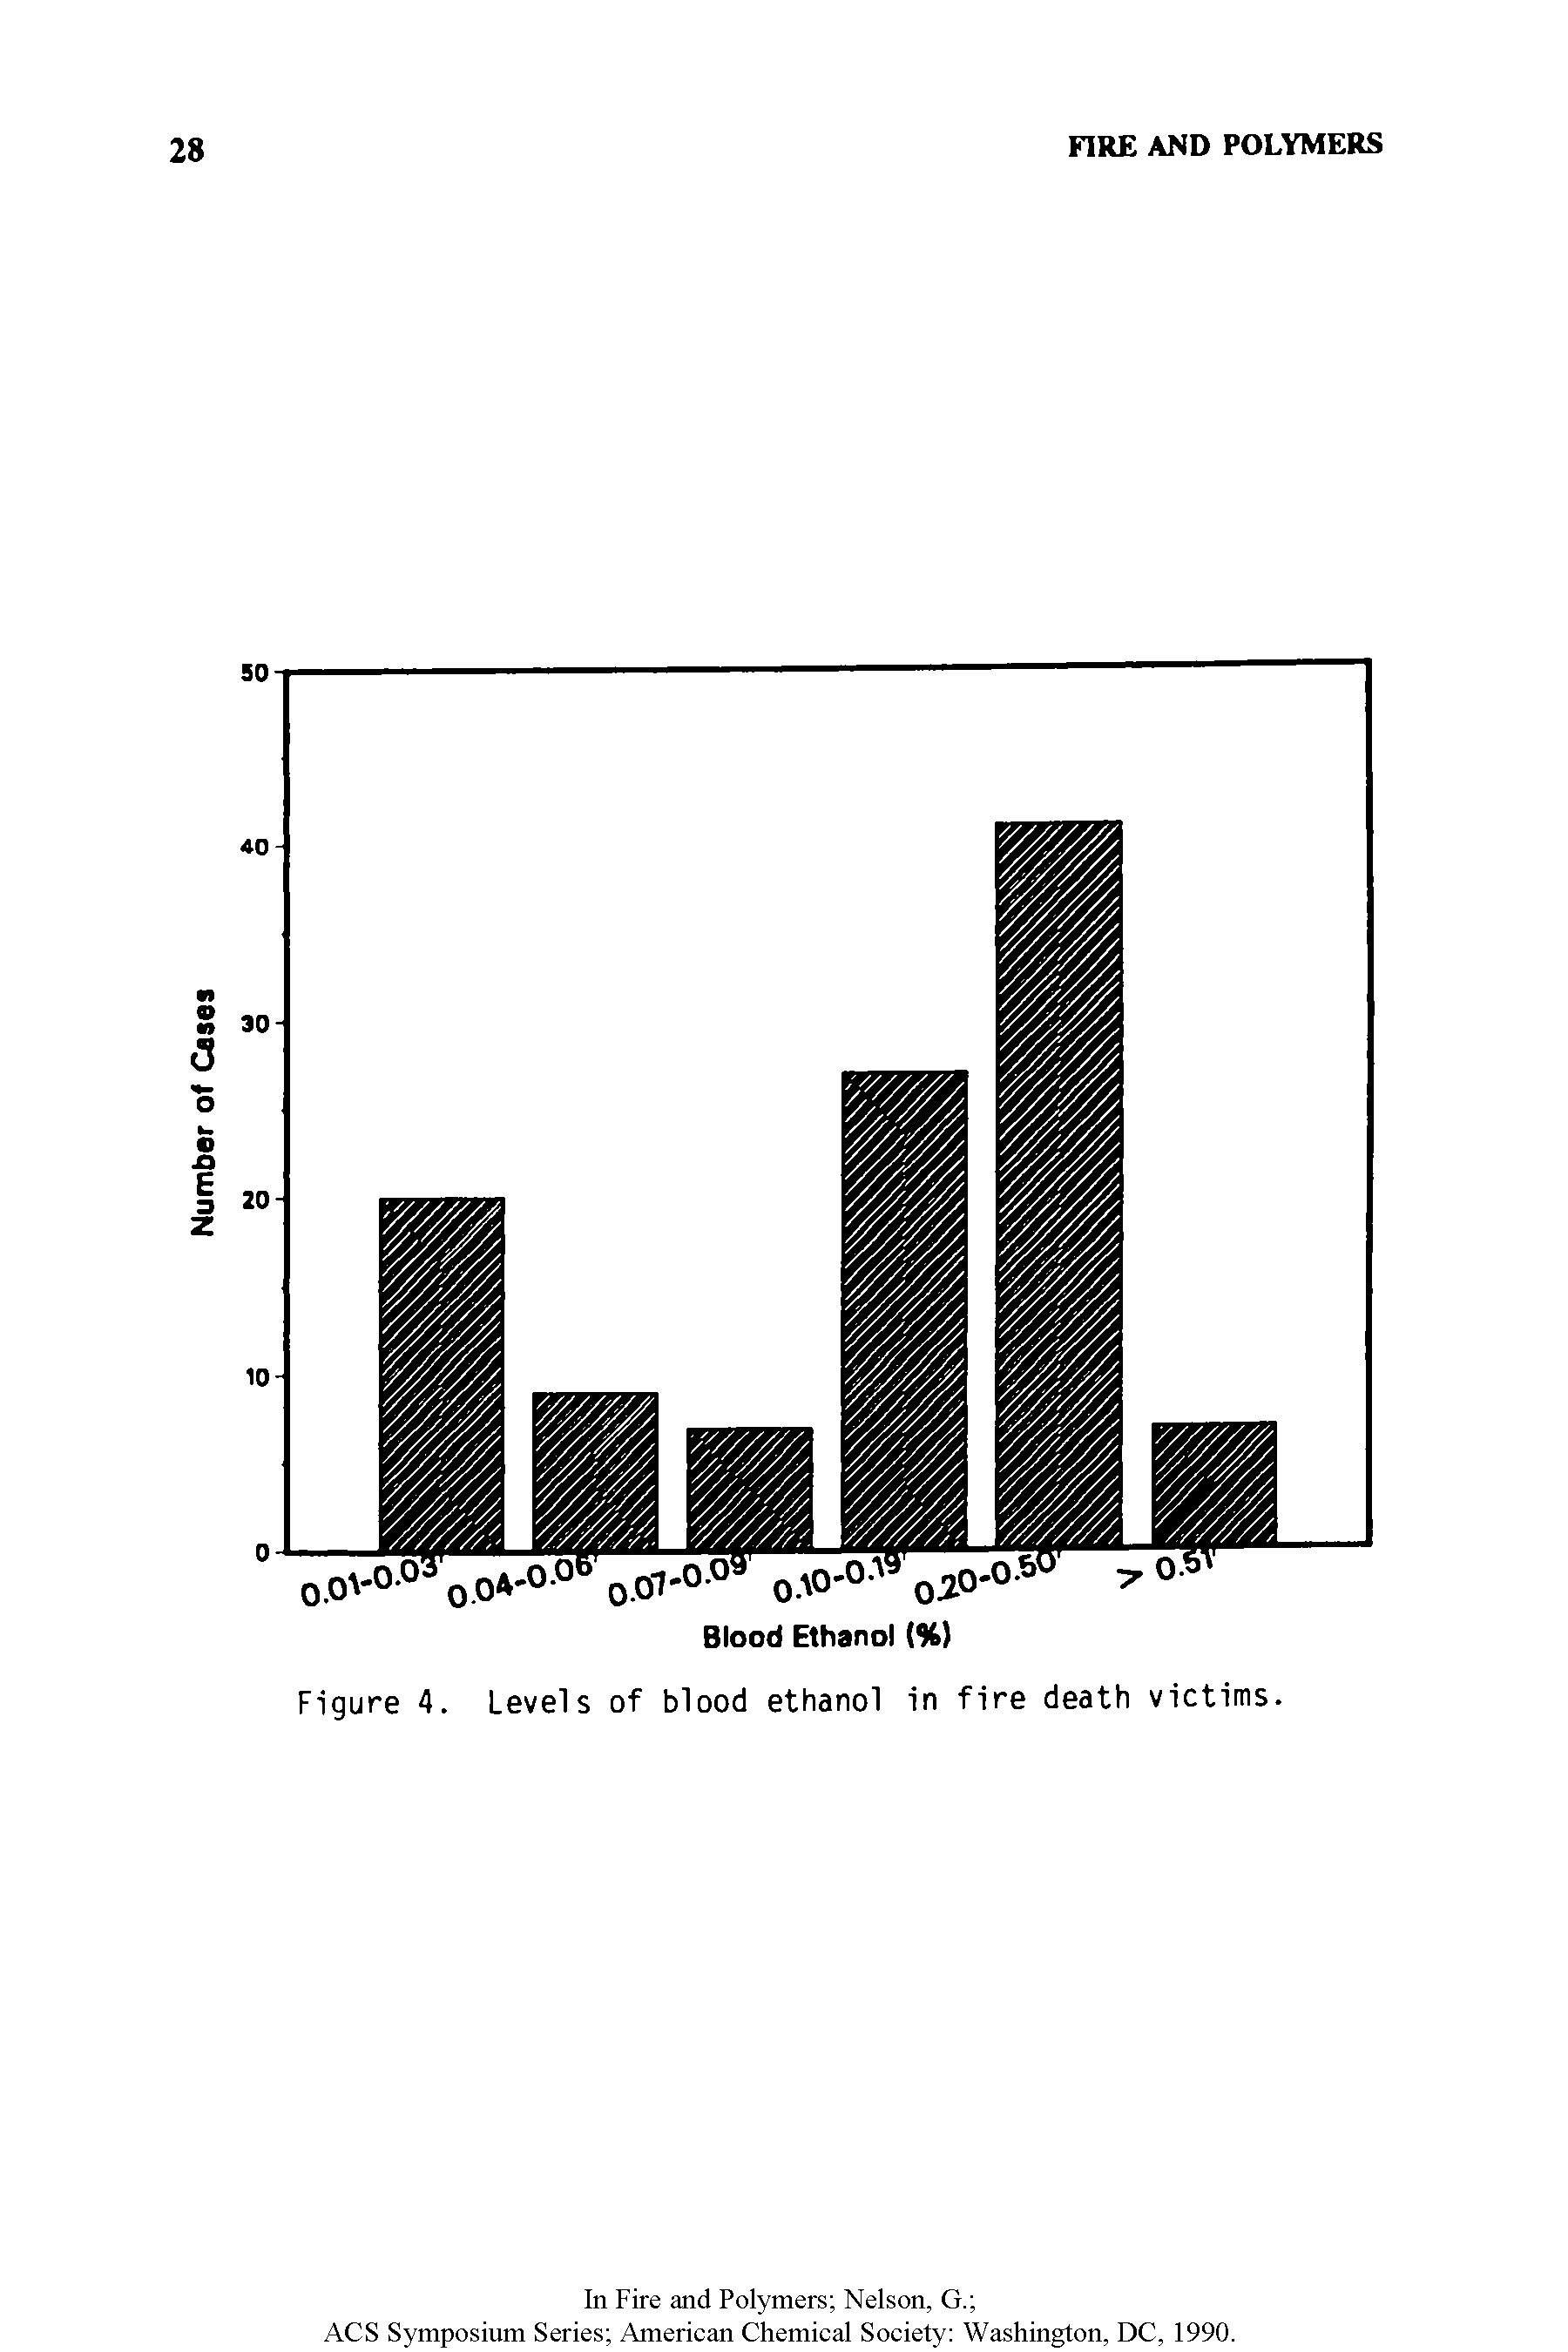 Figure 4. Levels of blood ethanol in fire death victims.